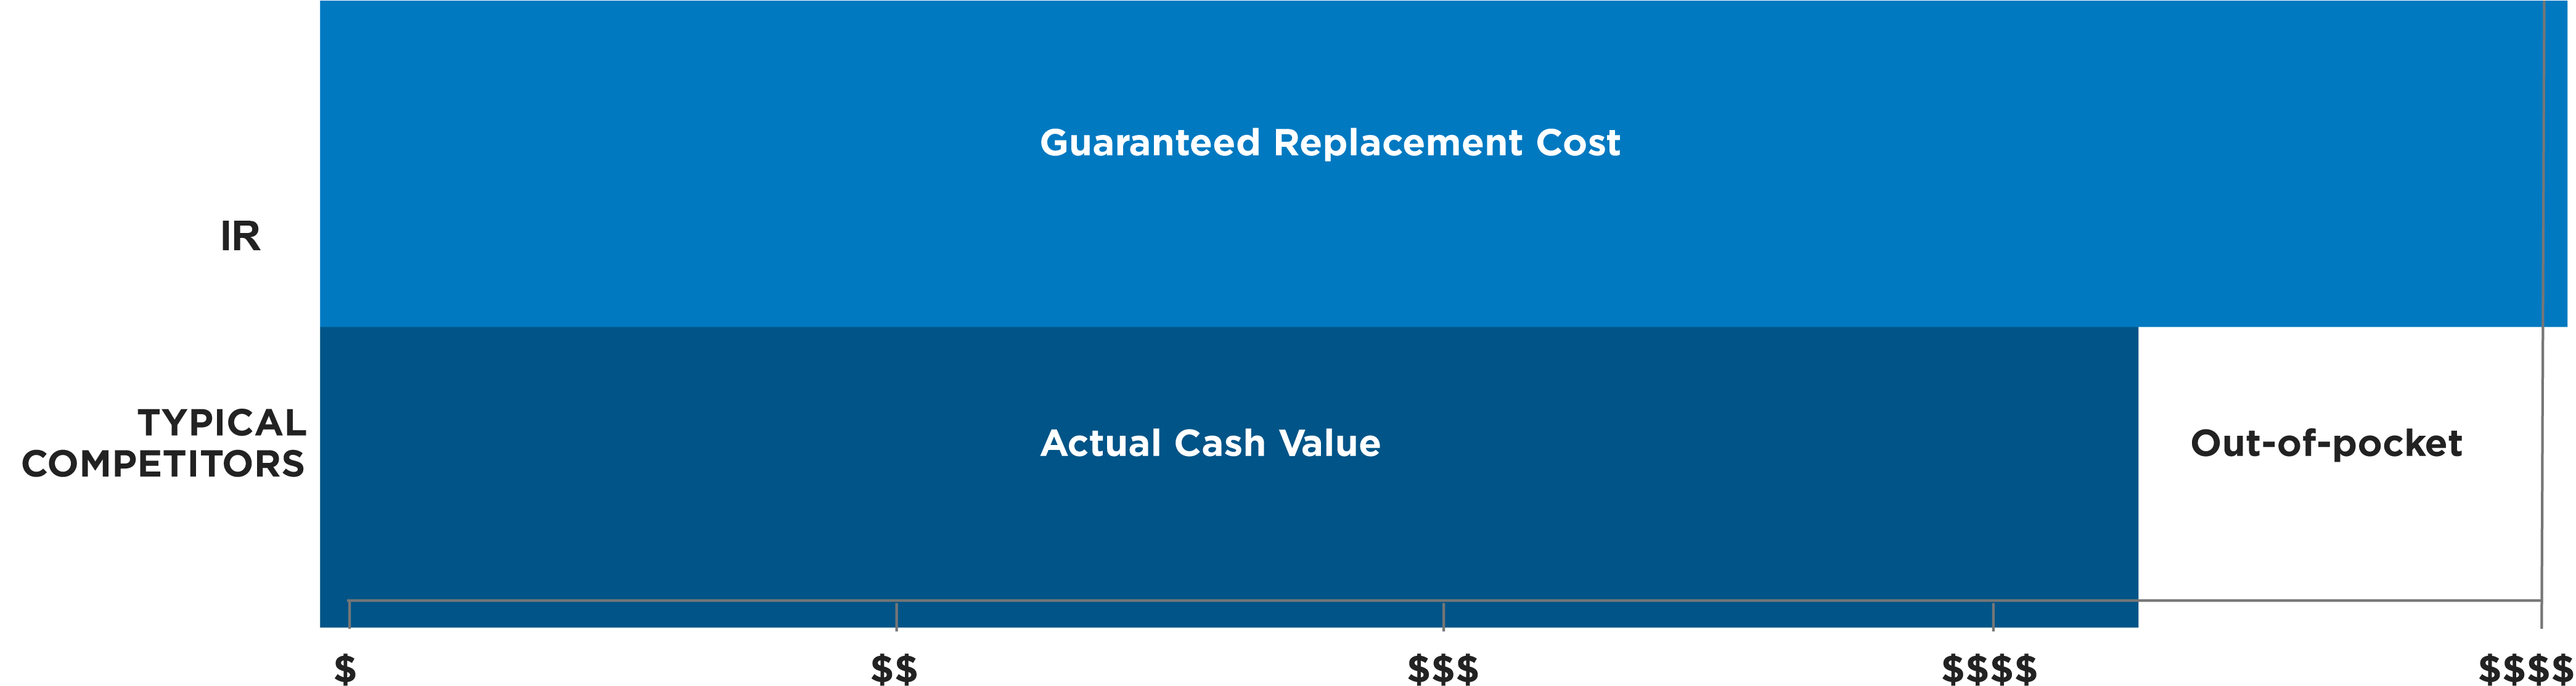 IR's guaranteed replacement cost goes the distance to protect you, while typical competitors only cover the Actual Cash Value leaving you to pay the rest out of pocket.